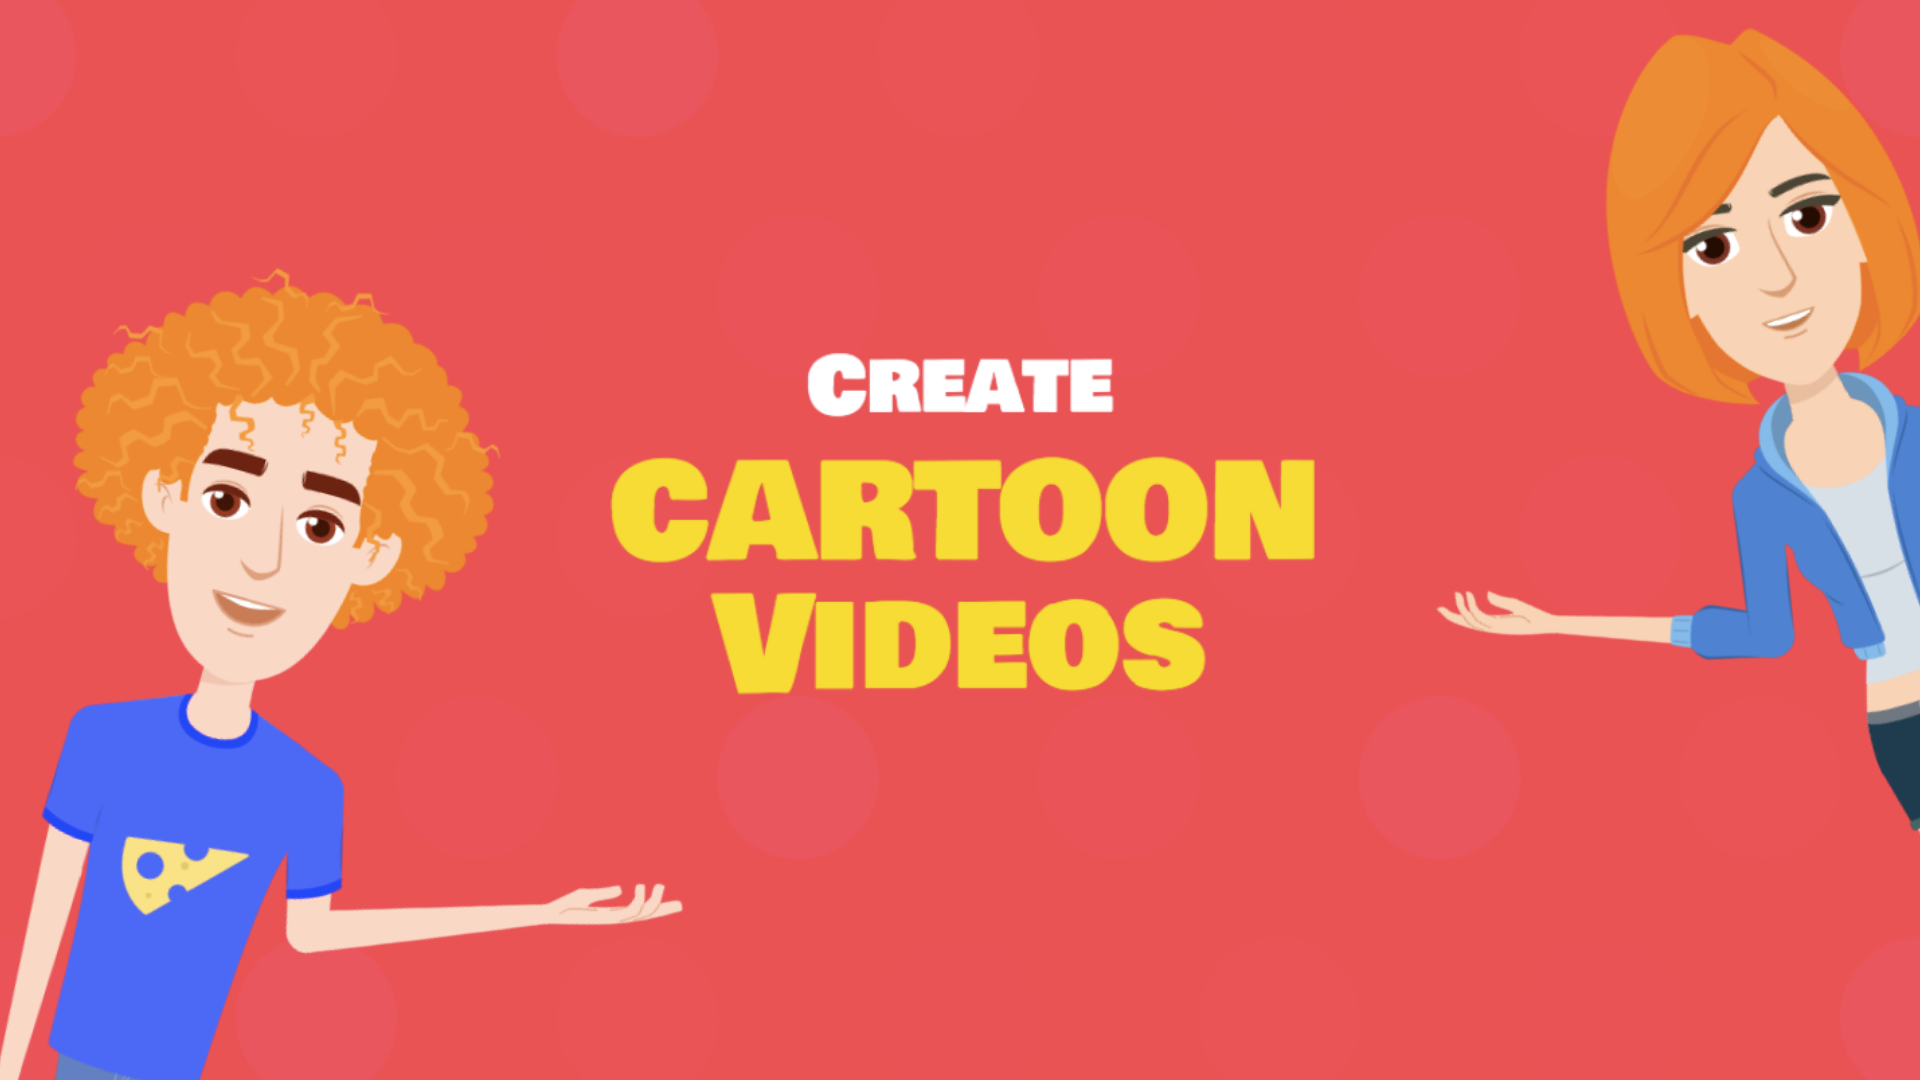 Character Creator 3  Content Pack Cartoon Character Designers  YouTube